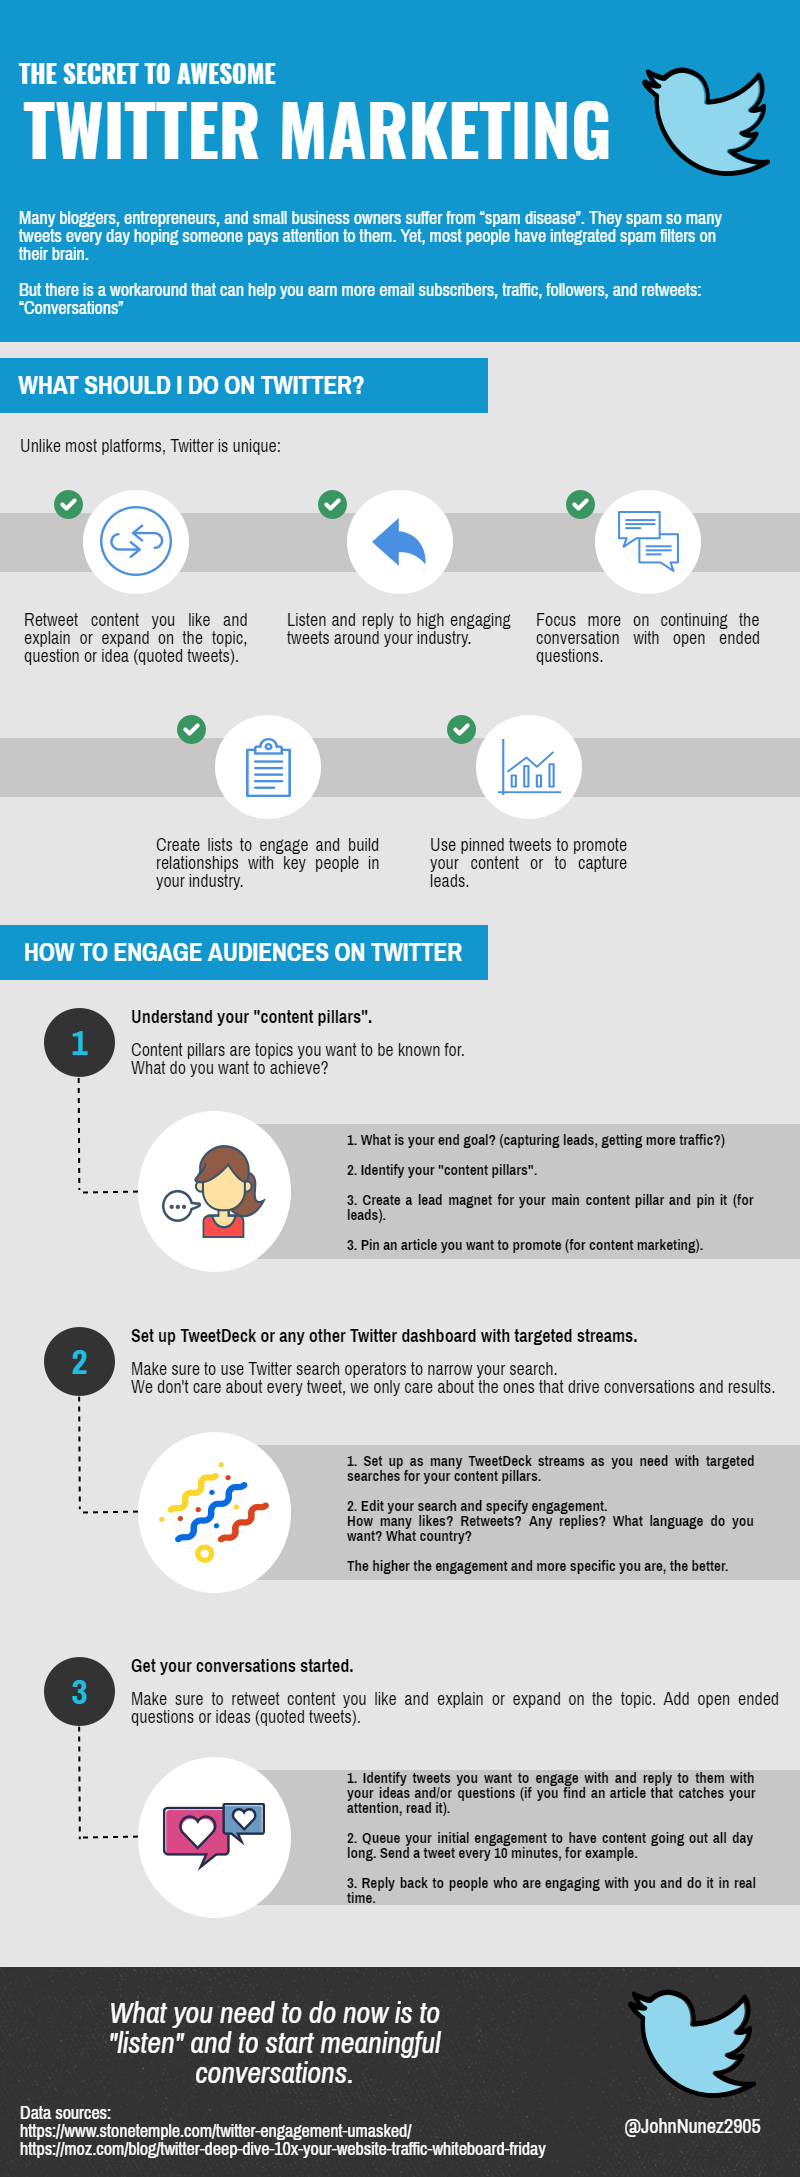 The Secret To Awesome Twitter Marketing